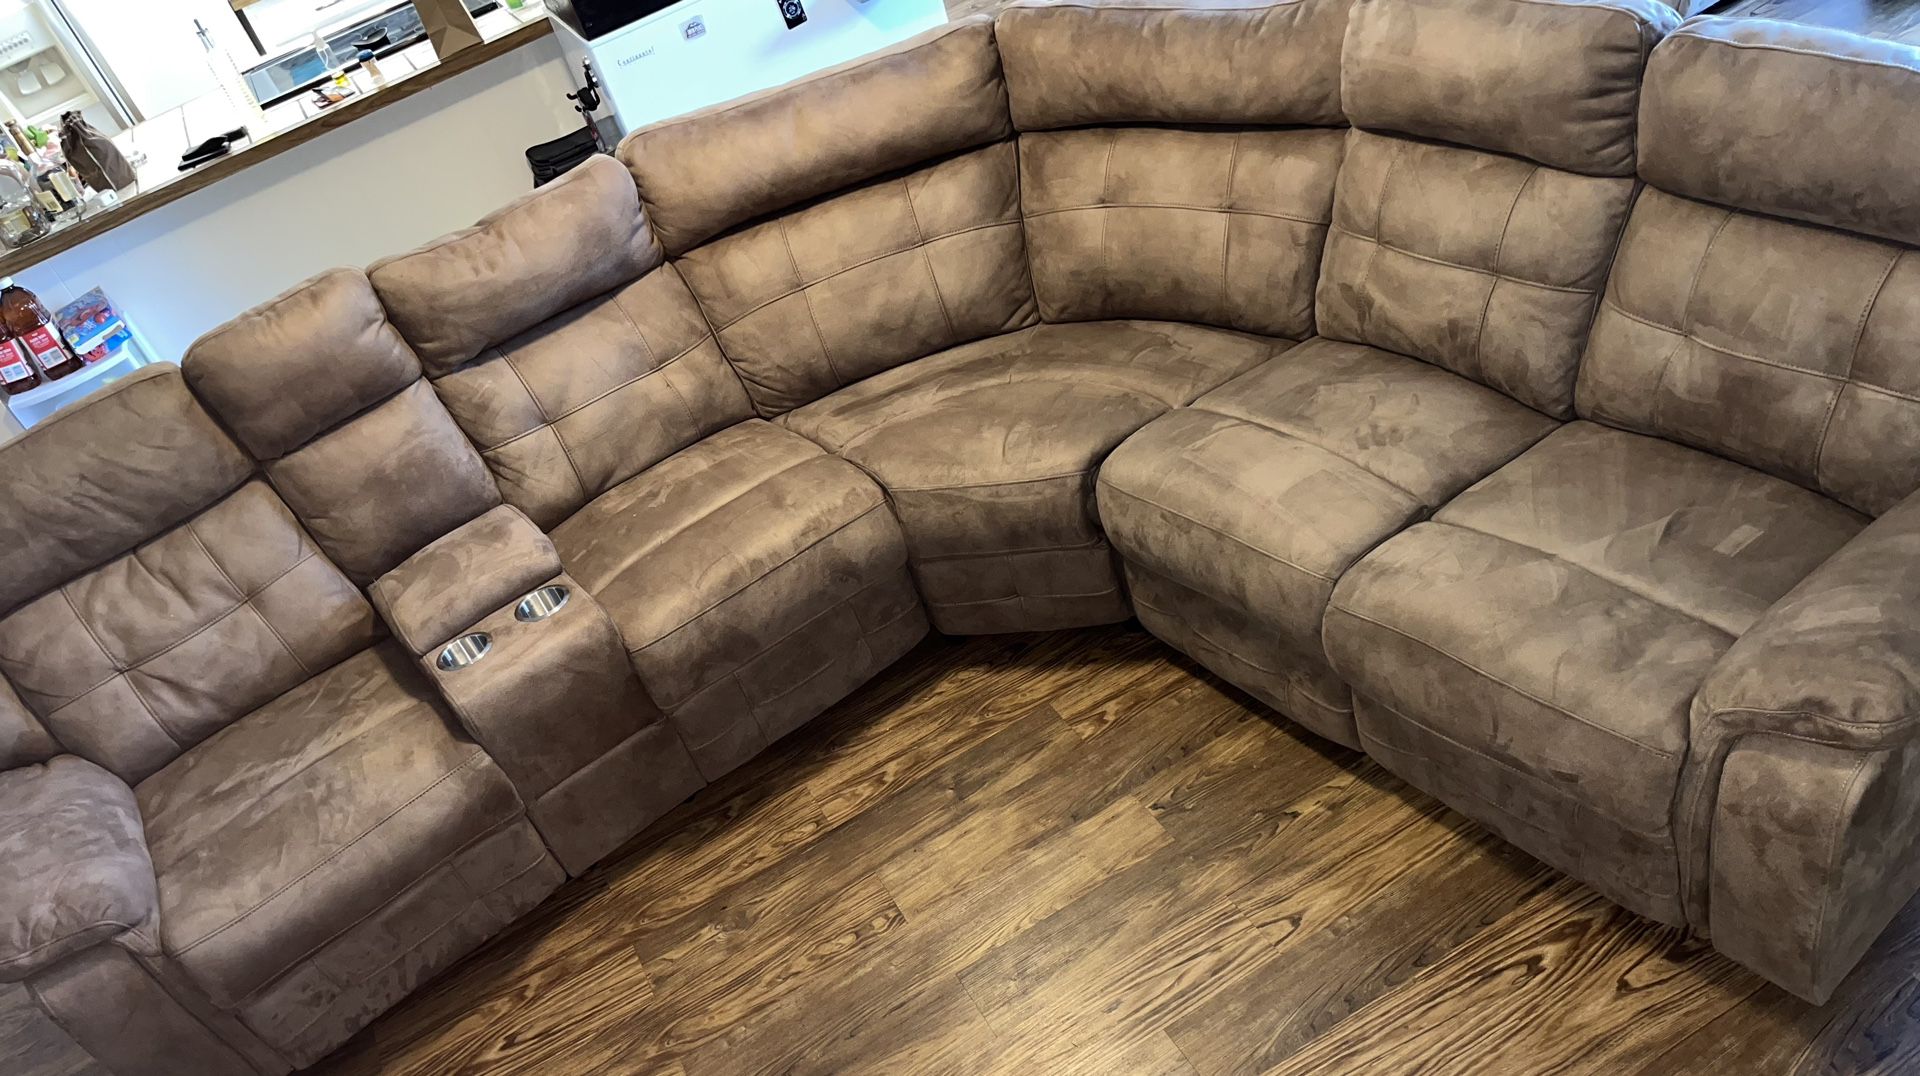 Three Piece Sectional Couch